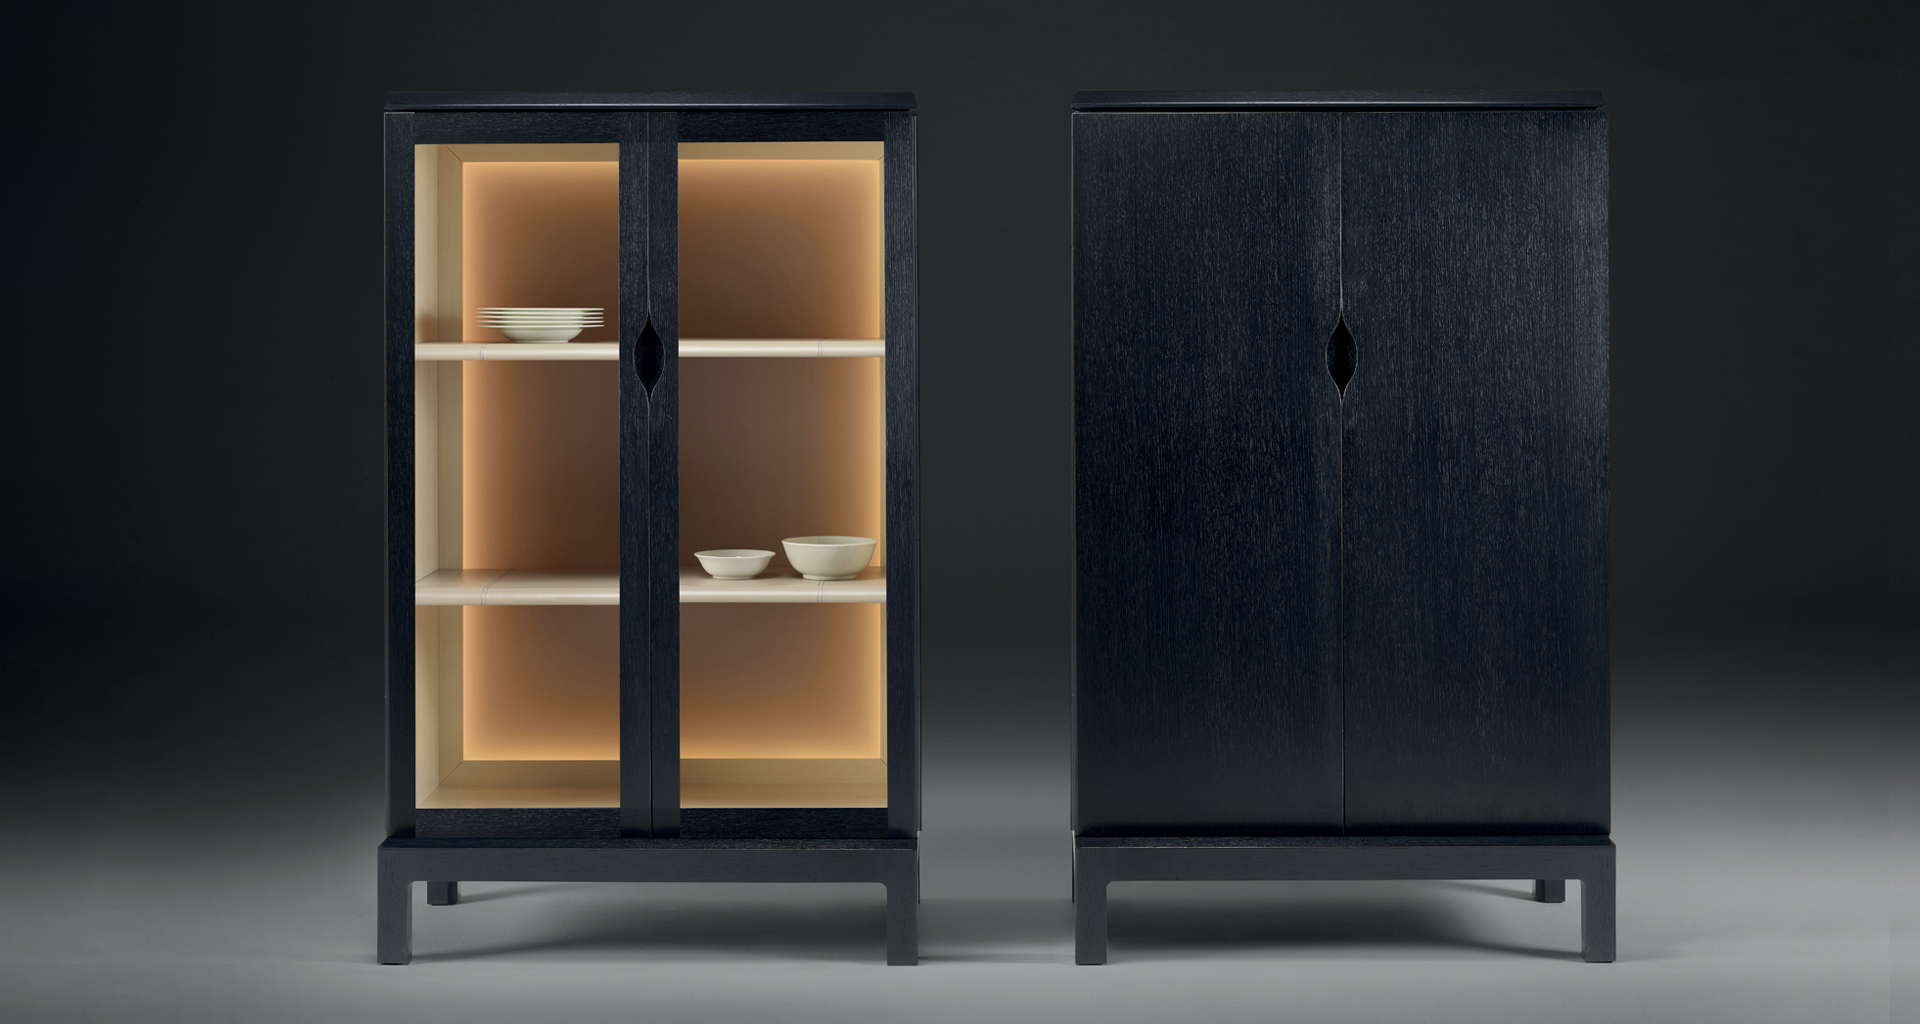 Laos is a wooden cabinet with a recessed handle and wooden or glass doors from Promemoria's Indigo Tales collection | Promemoria